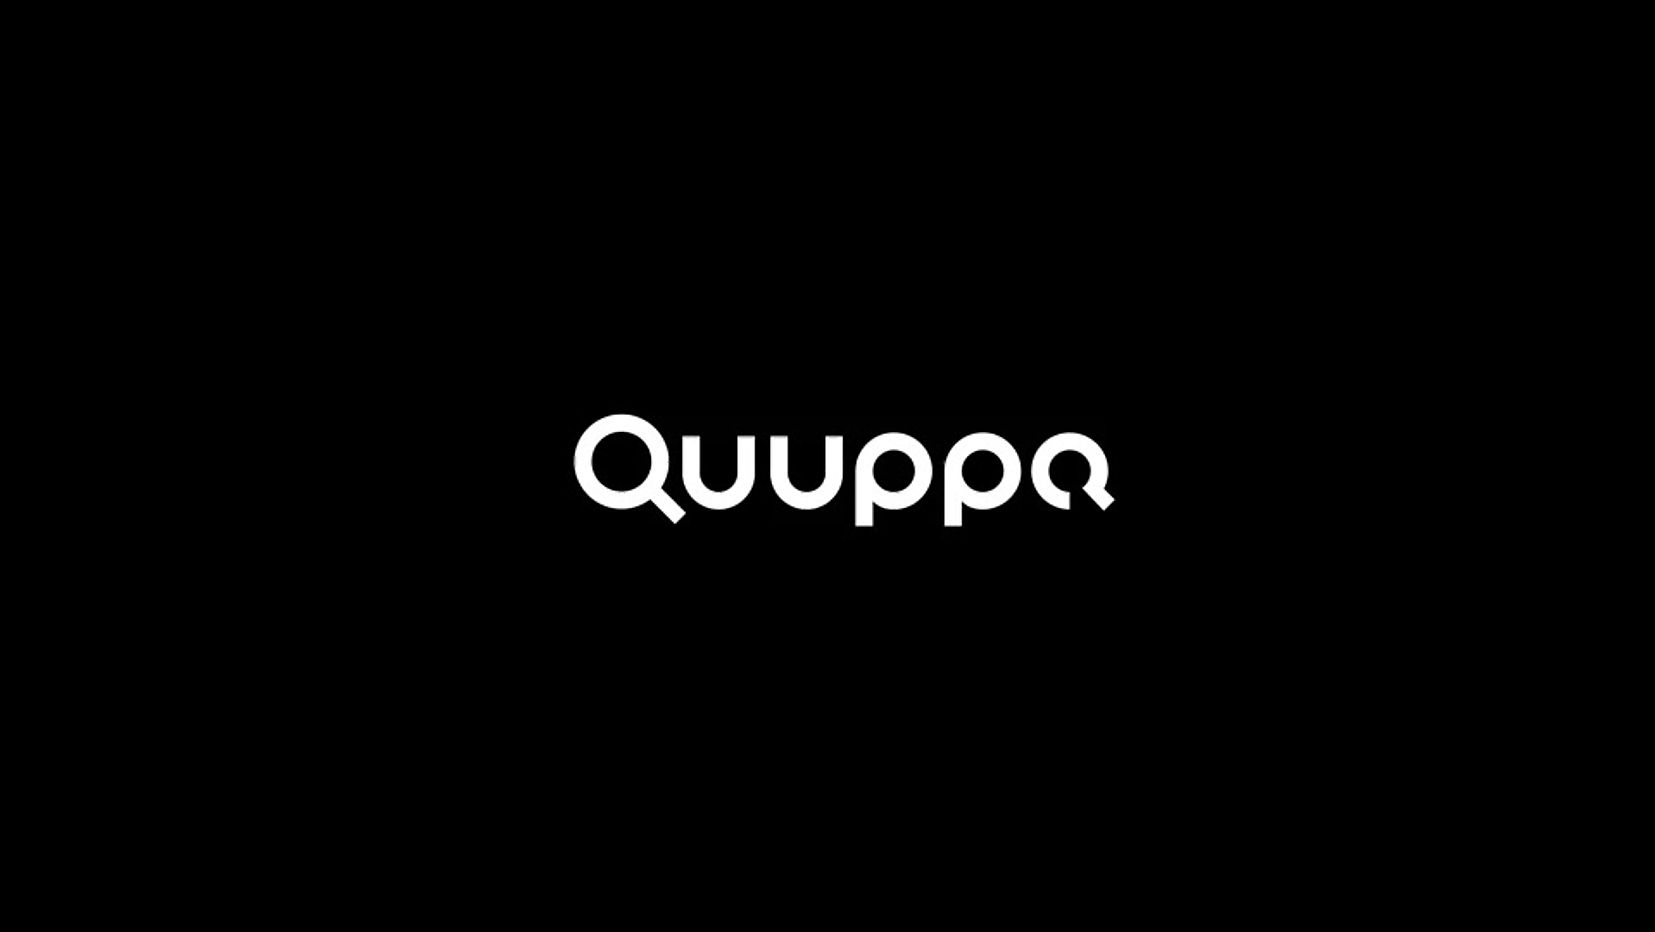 Quuppa Use Cases